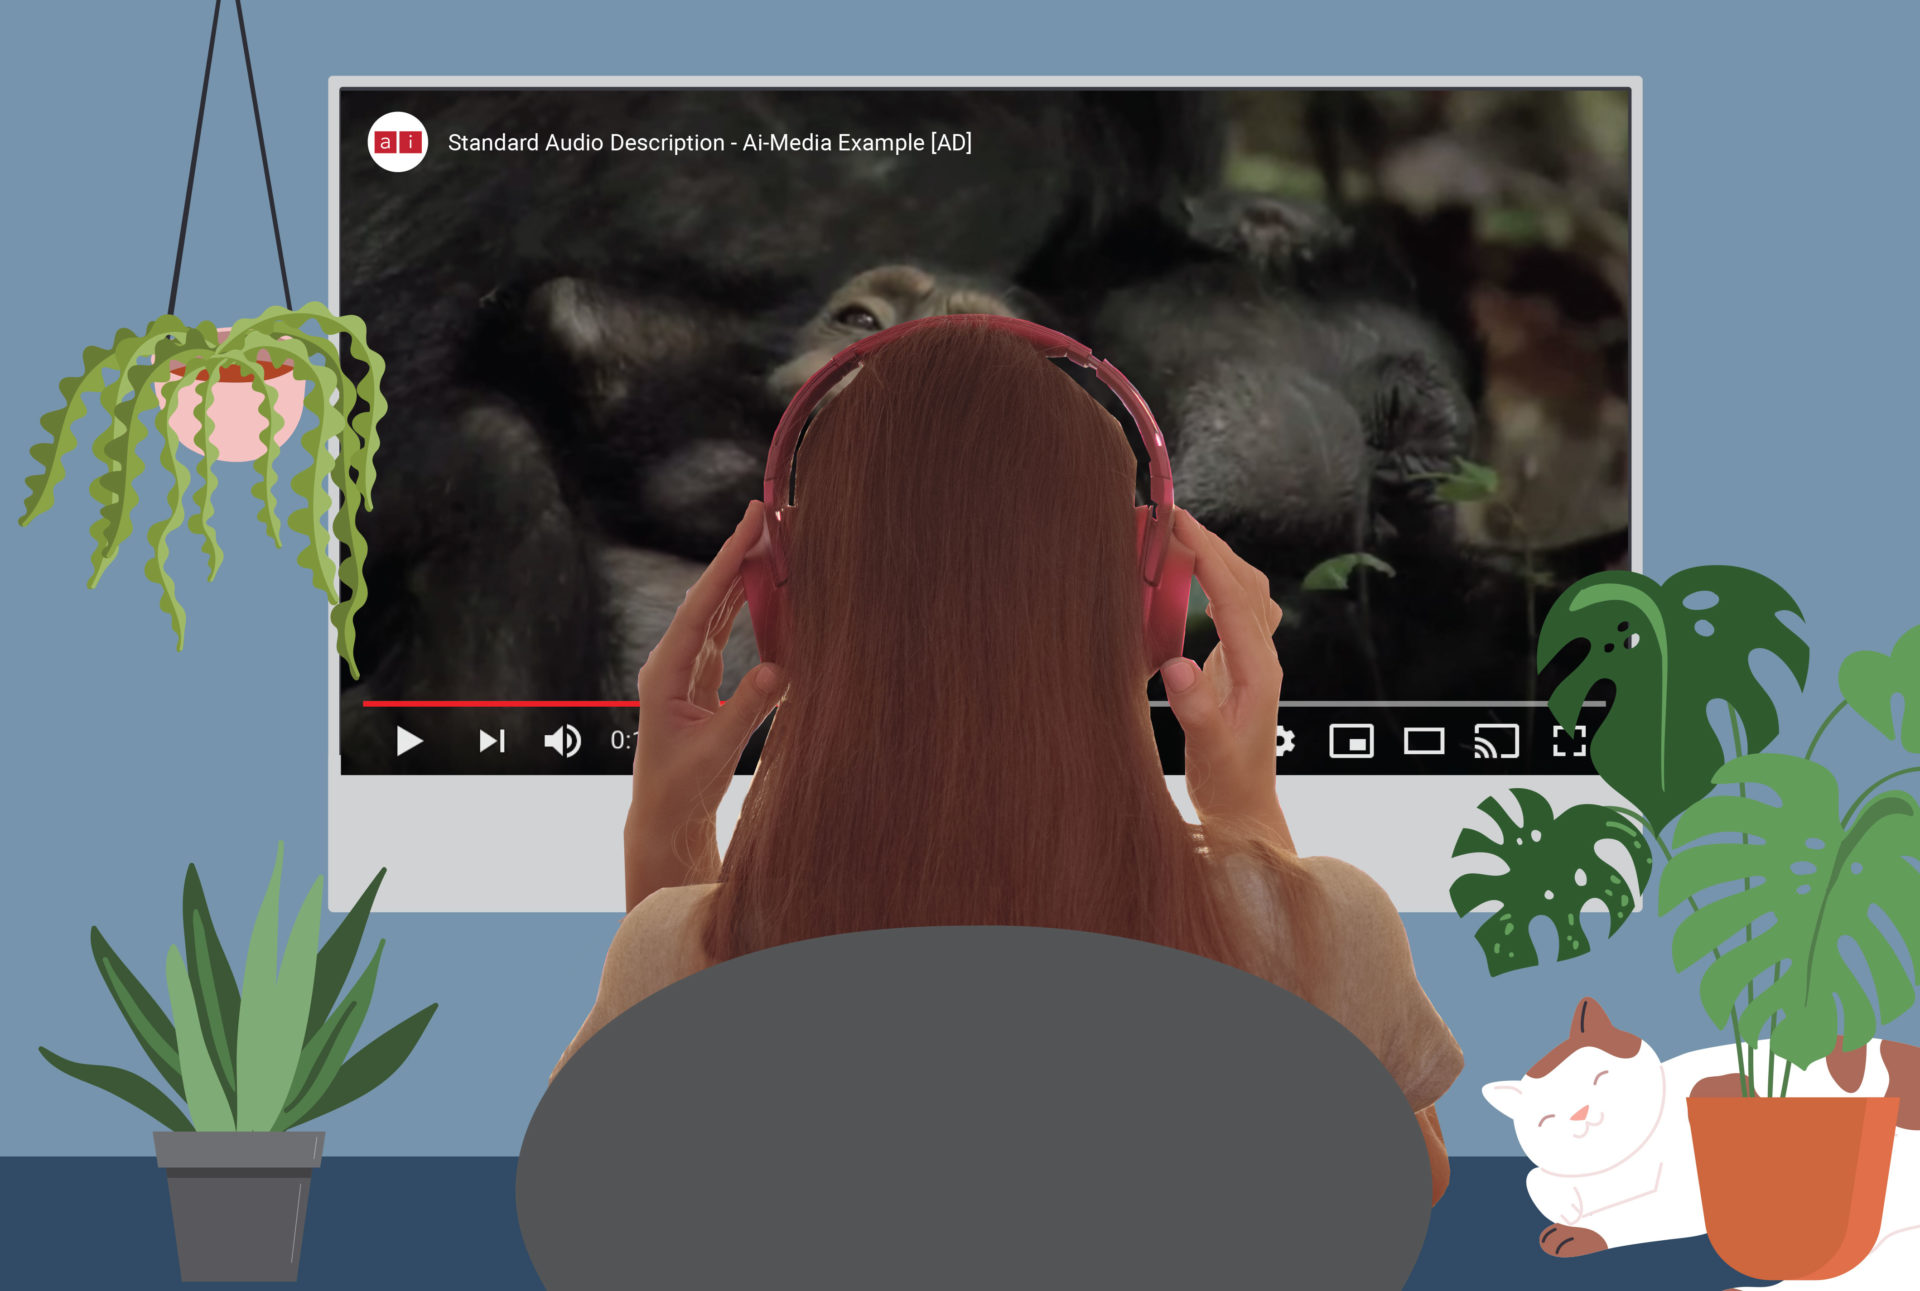 A person sitting at a desk with headphones on, using audio description to listen to a video playing on the computer in front of them. There are plants on the desk and a cat asleep on the right-hand side.